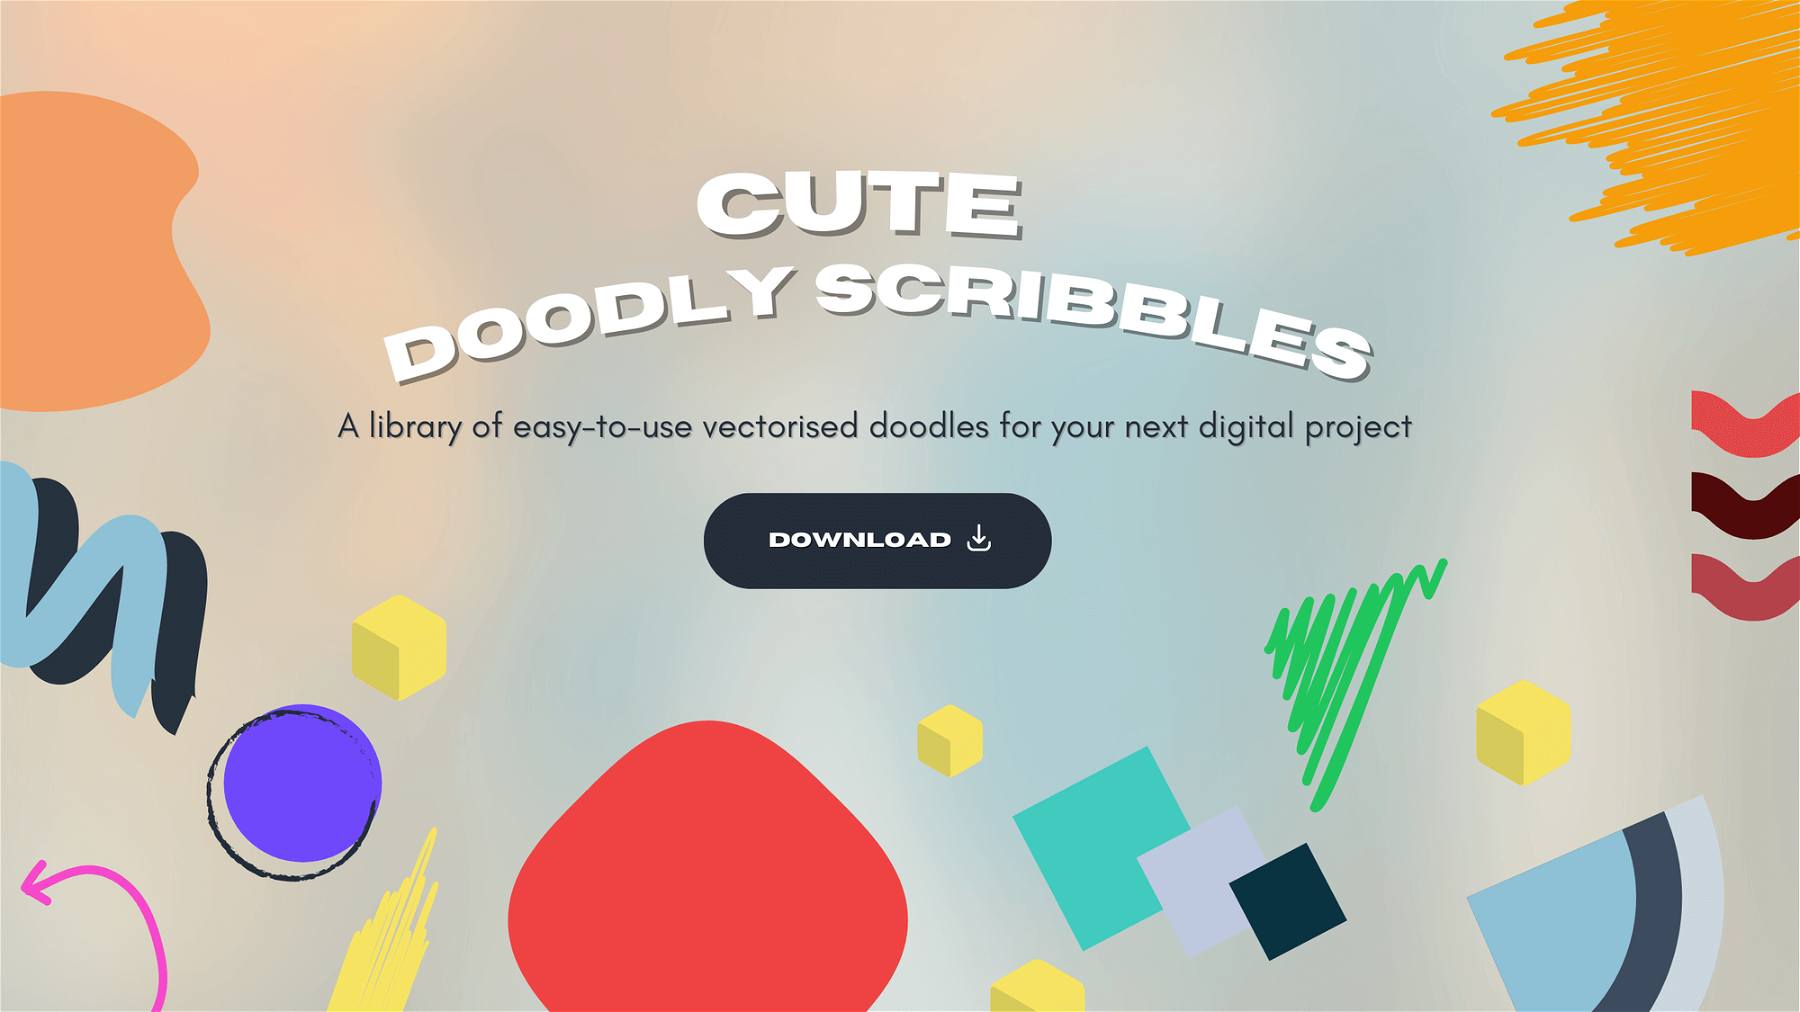 Cute Doodly Scribbles is a Collection of Funky Vectorized Scribbles and Shapes for your Digital Design Projects.